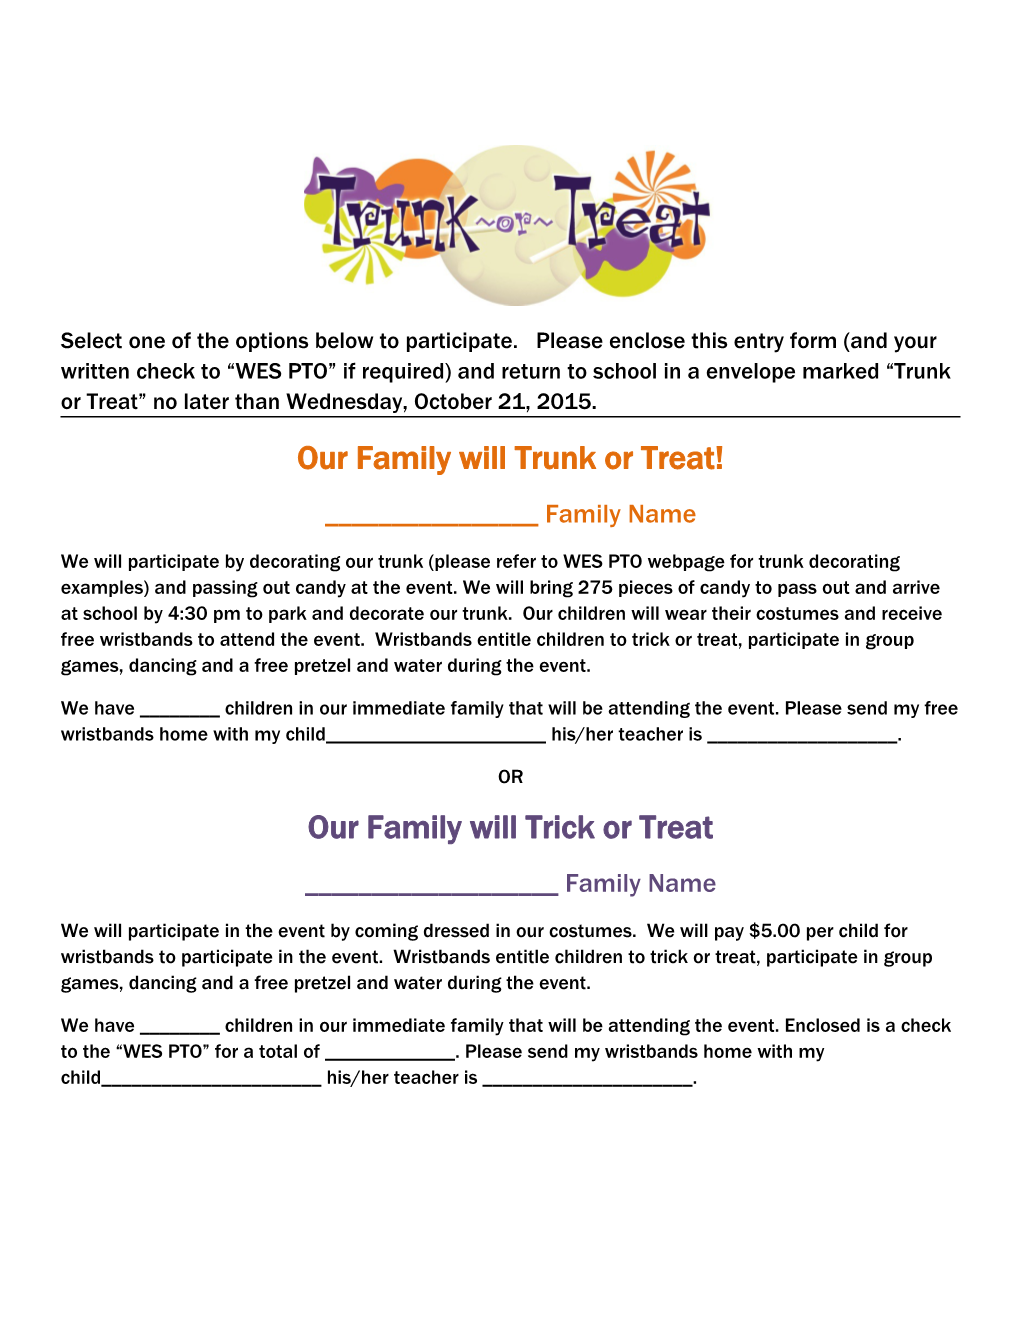 Our Family Will Trunk Or Treat!